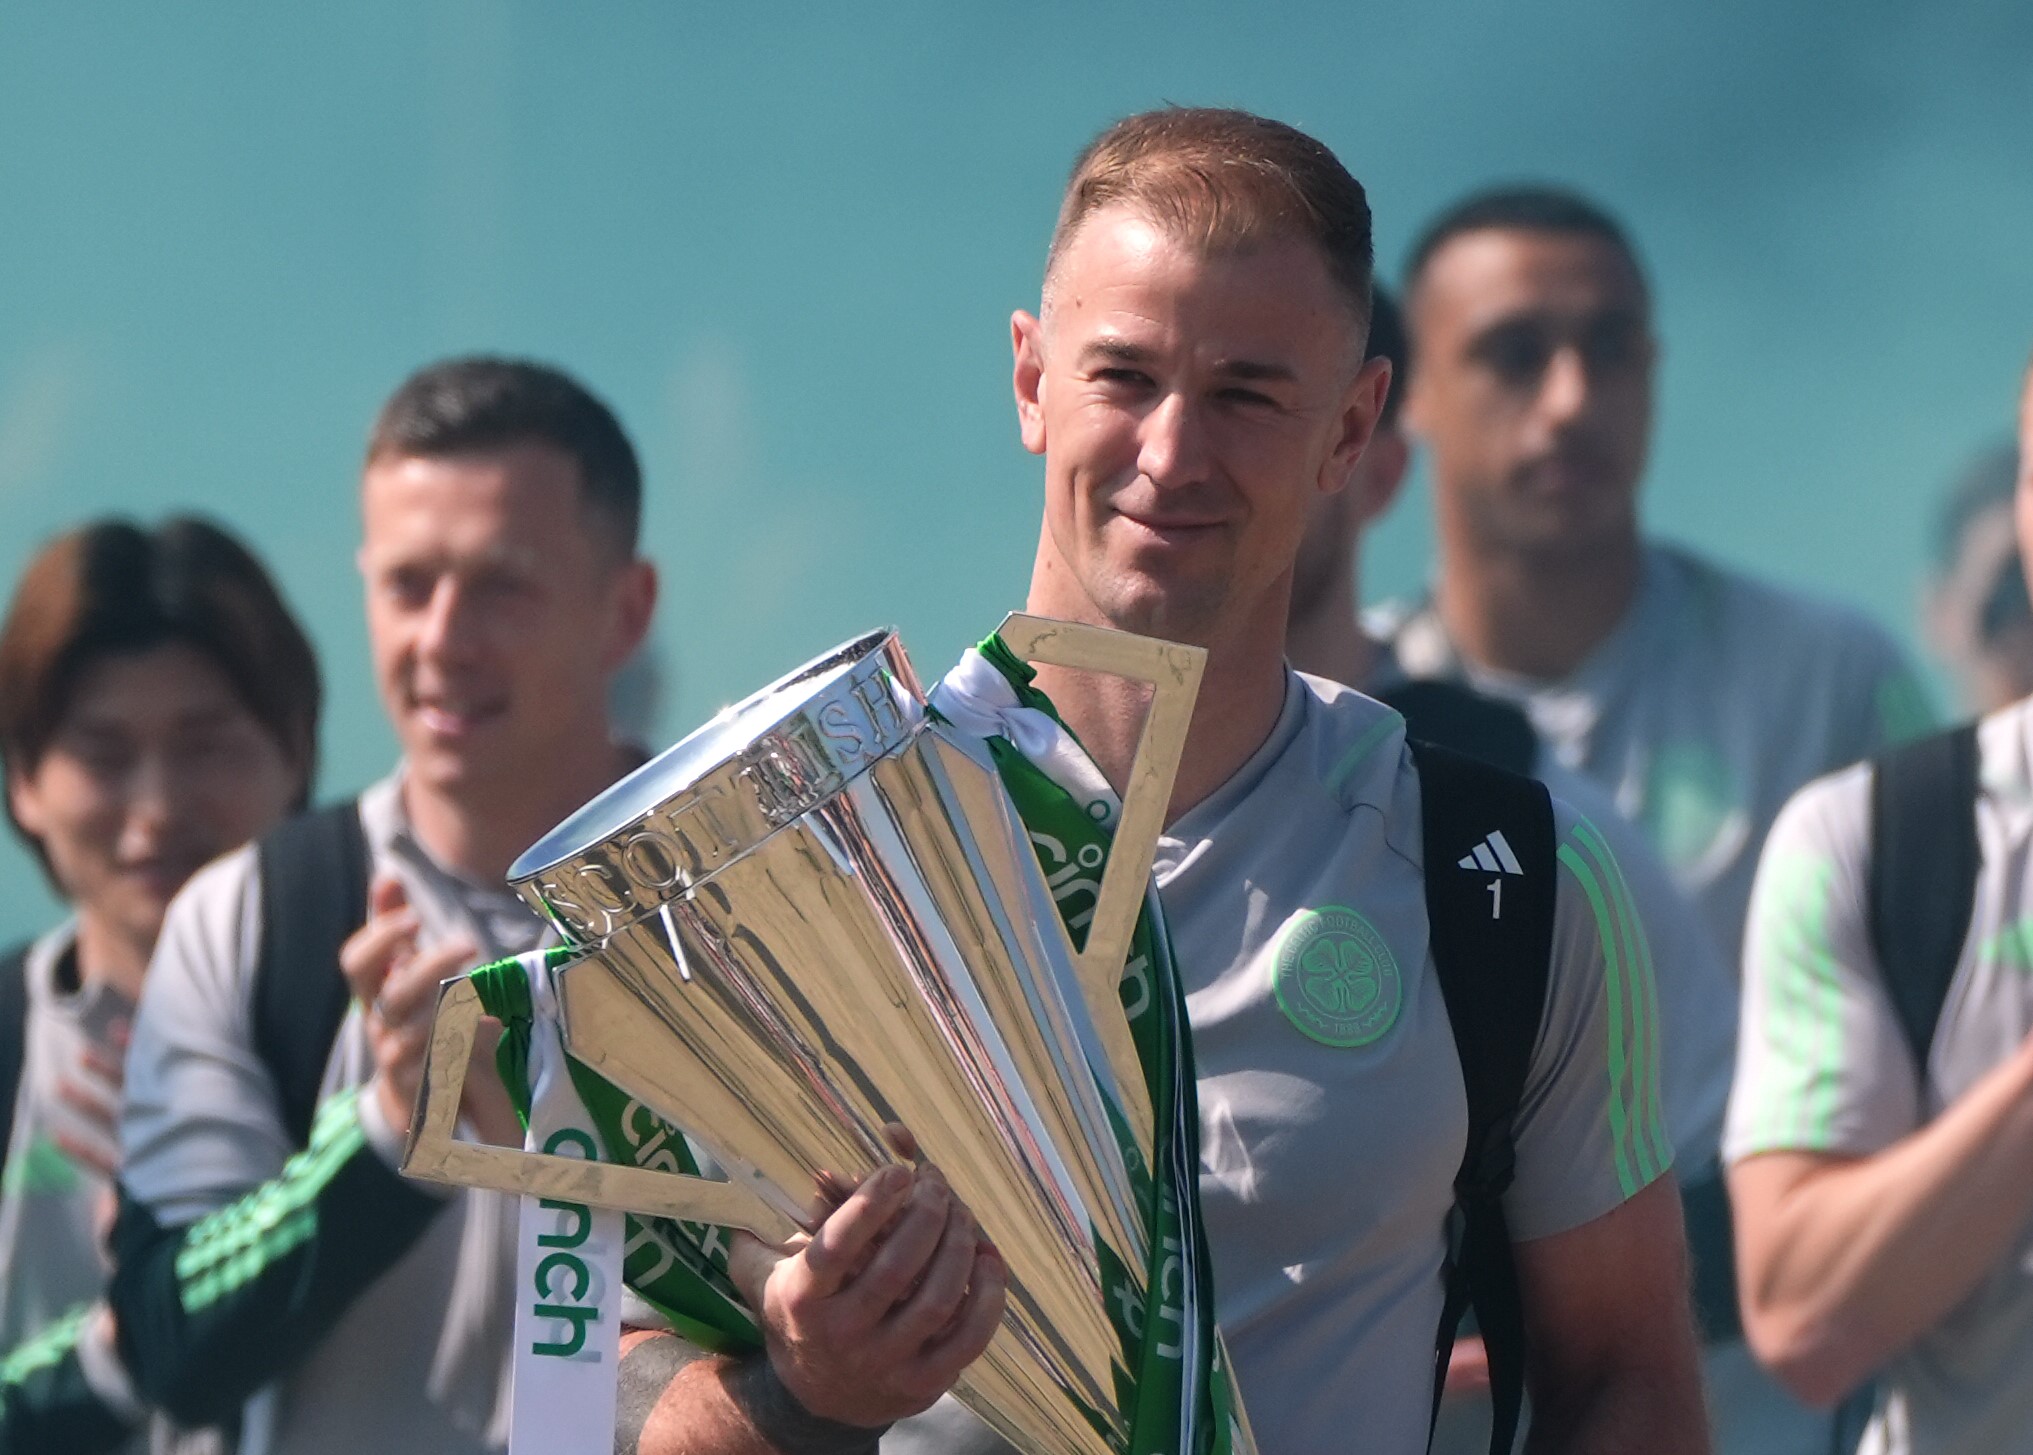 The smoke clears and Celtic emerge as champions...again